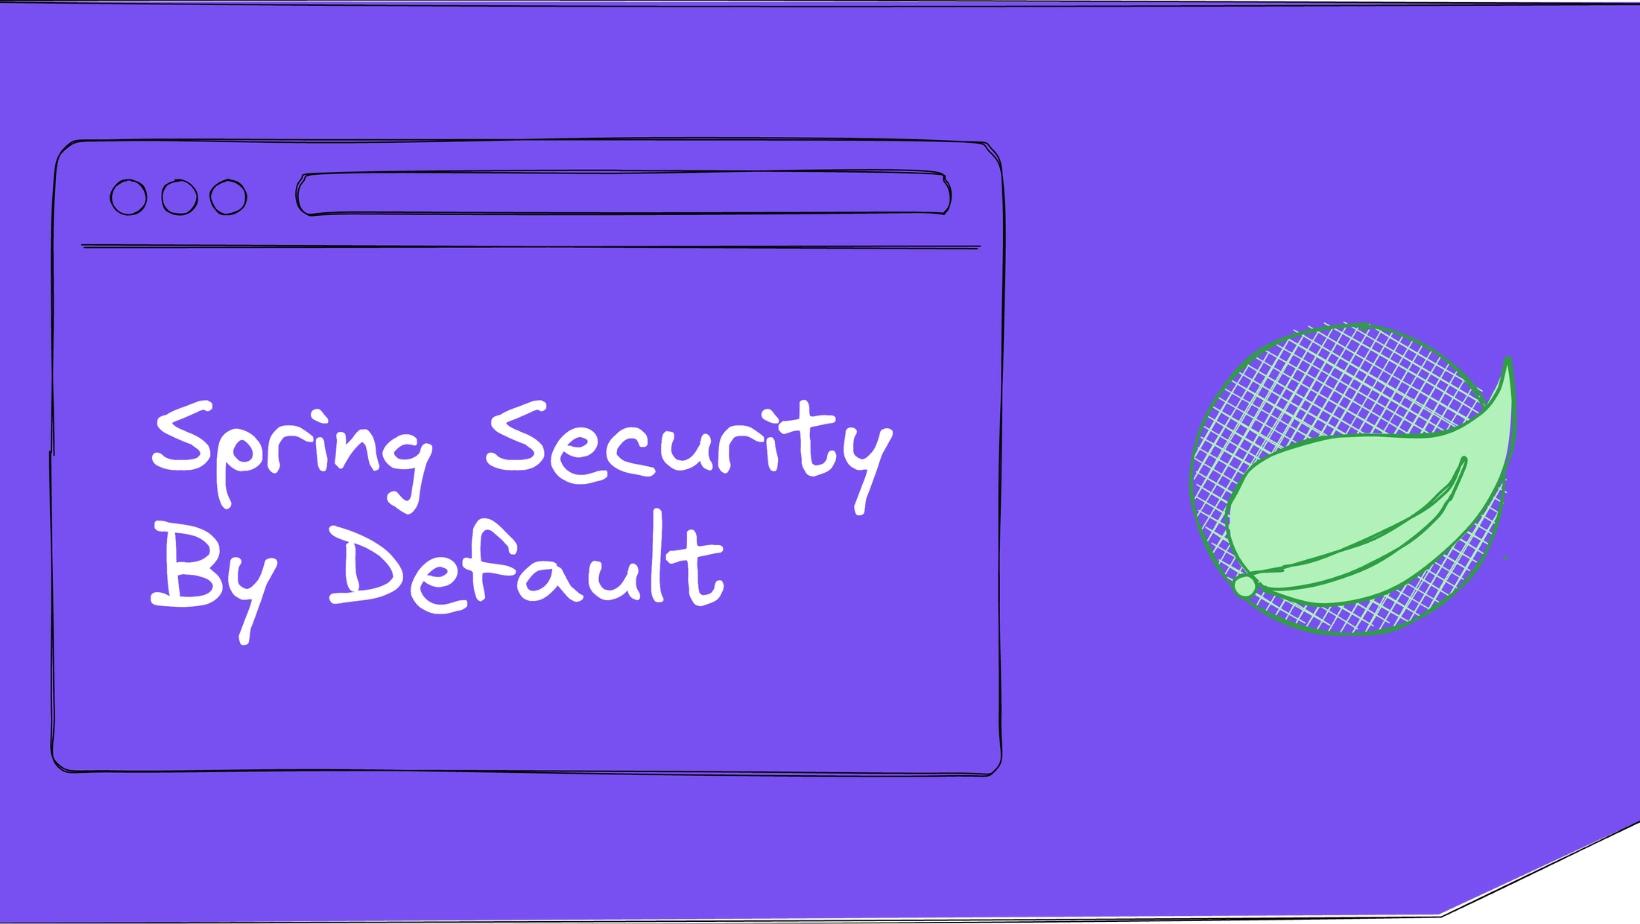 Spring Security by Default in a Spring Boot API